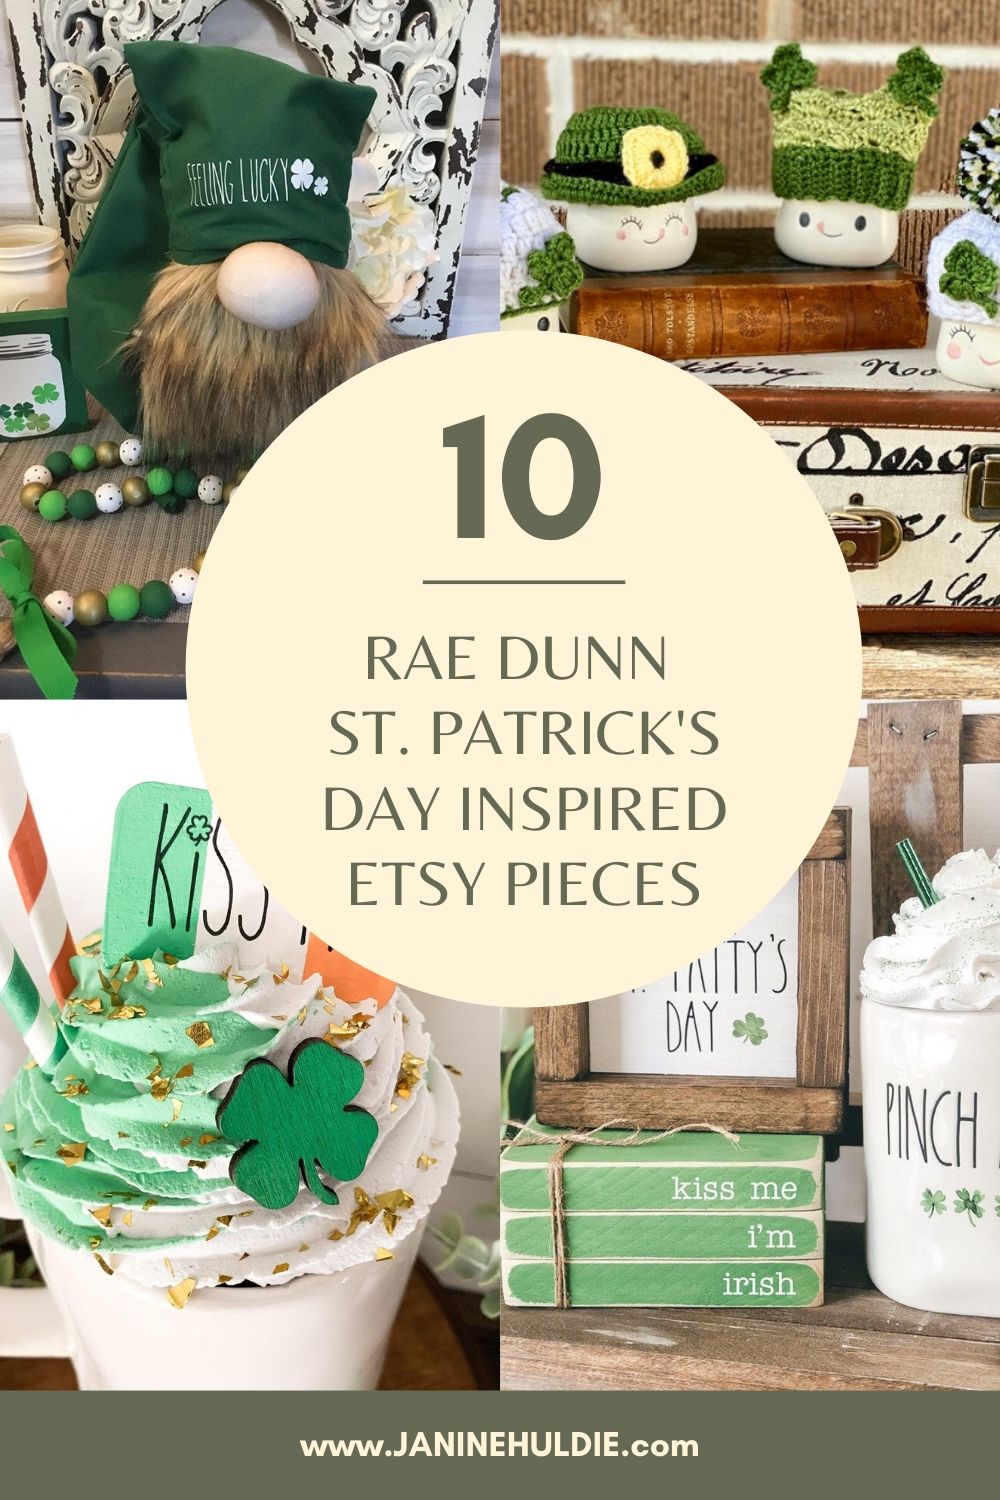 10 RAE DUNN ST. PATRICK'S DAY INSPIRED PIECES